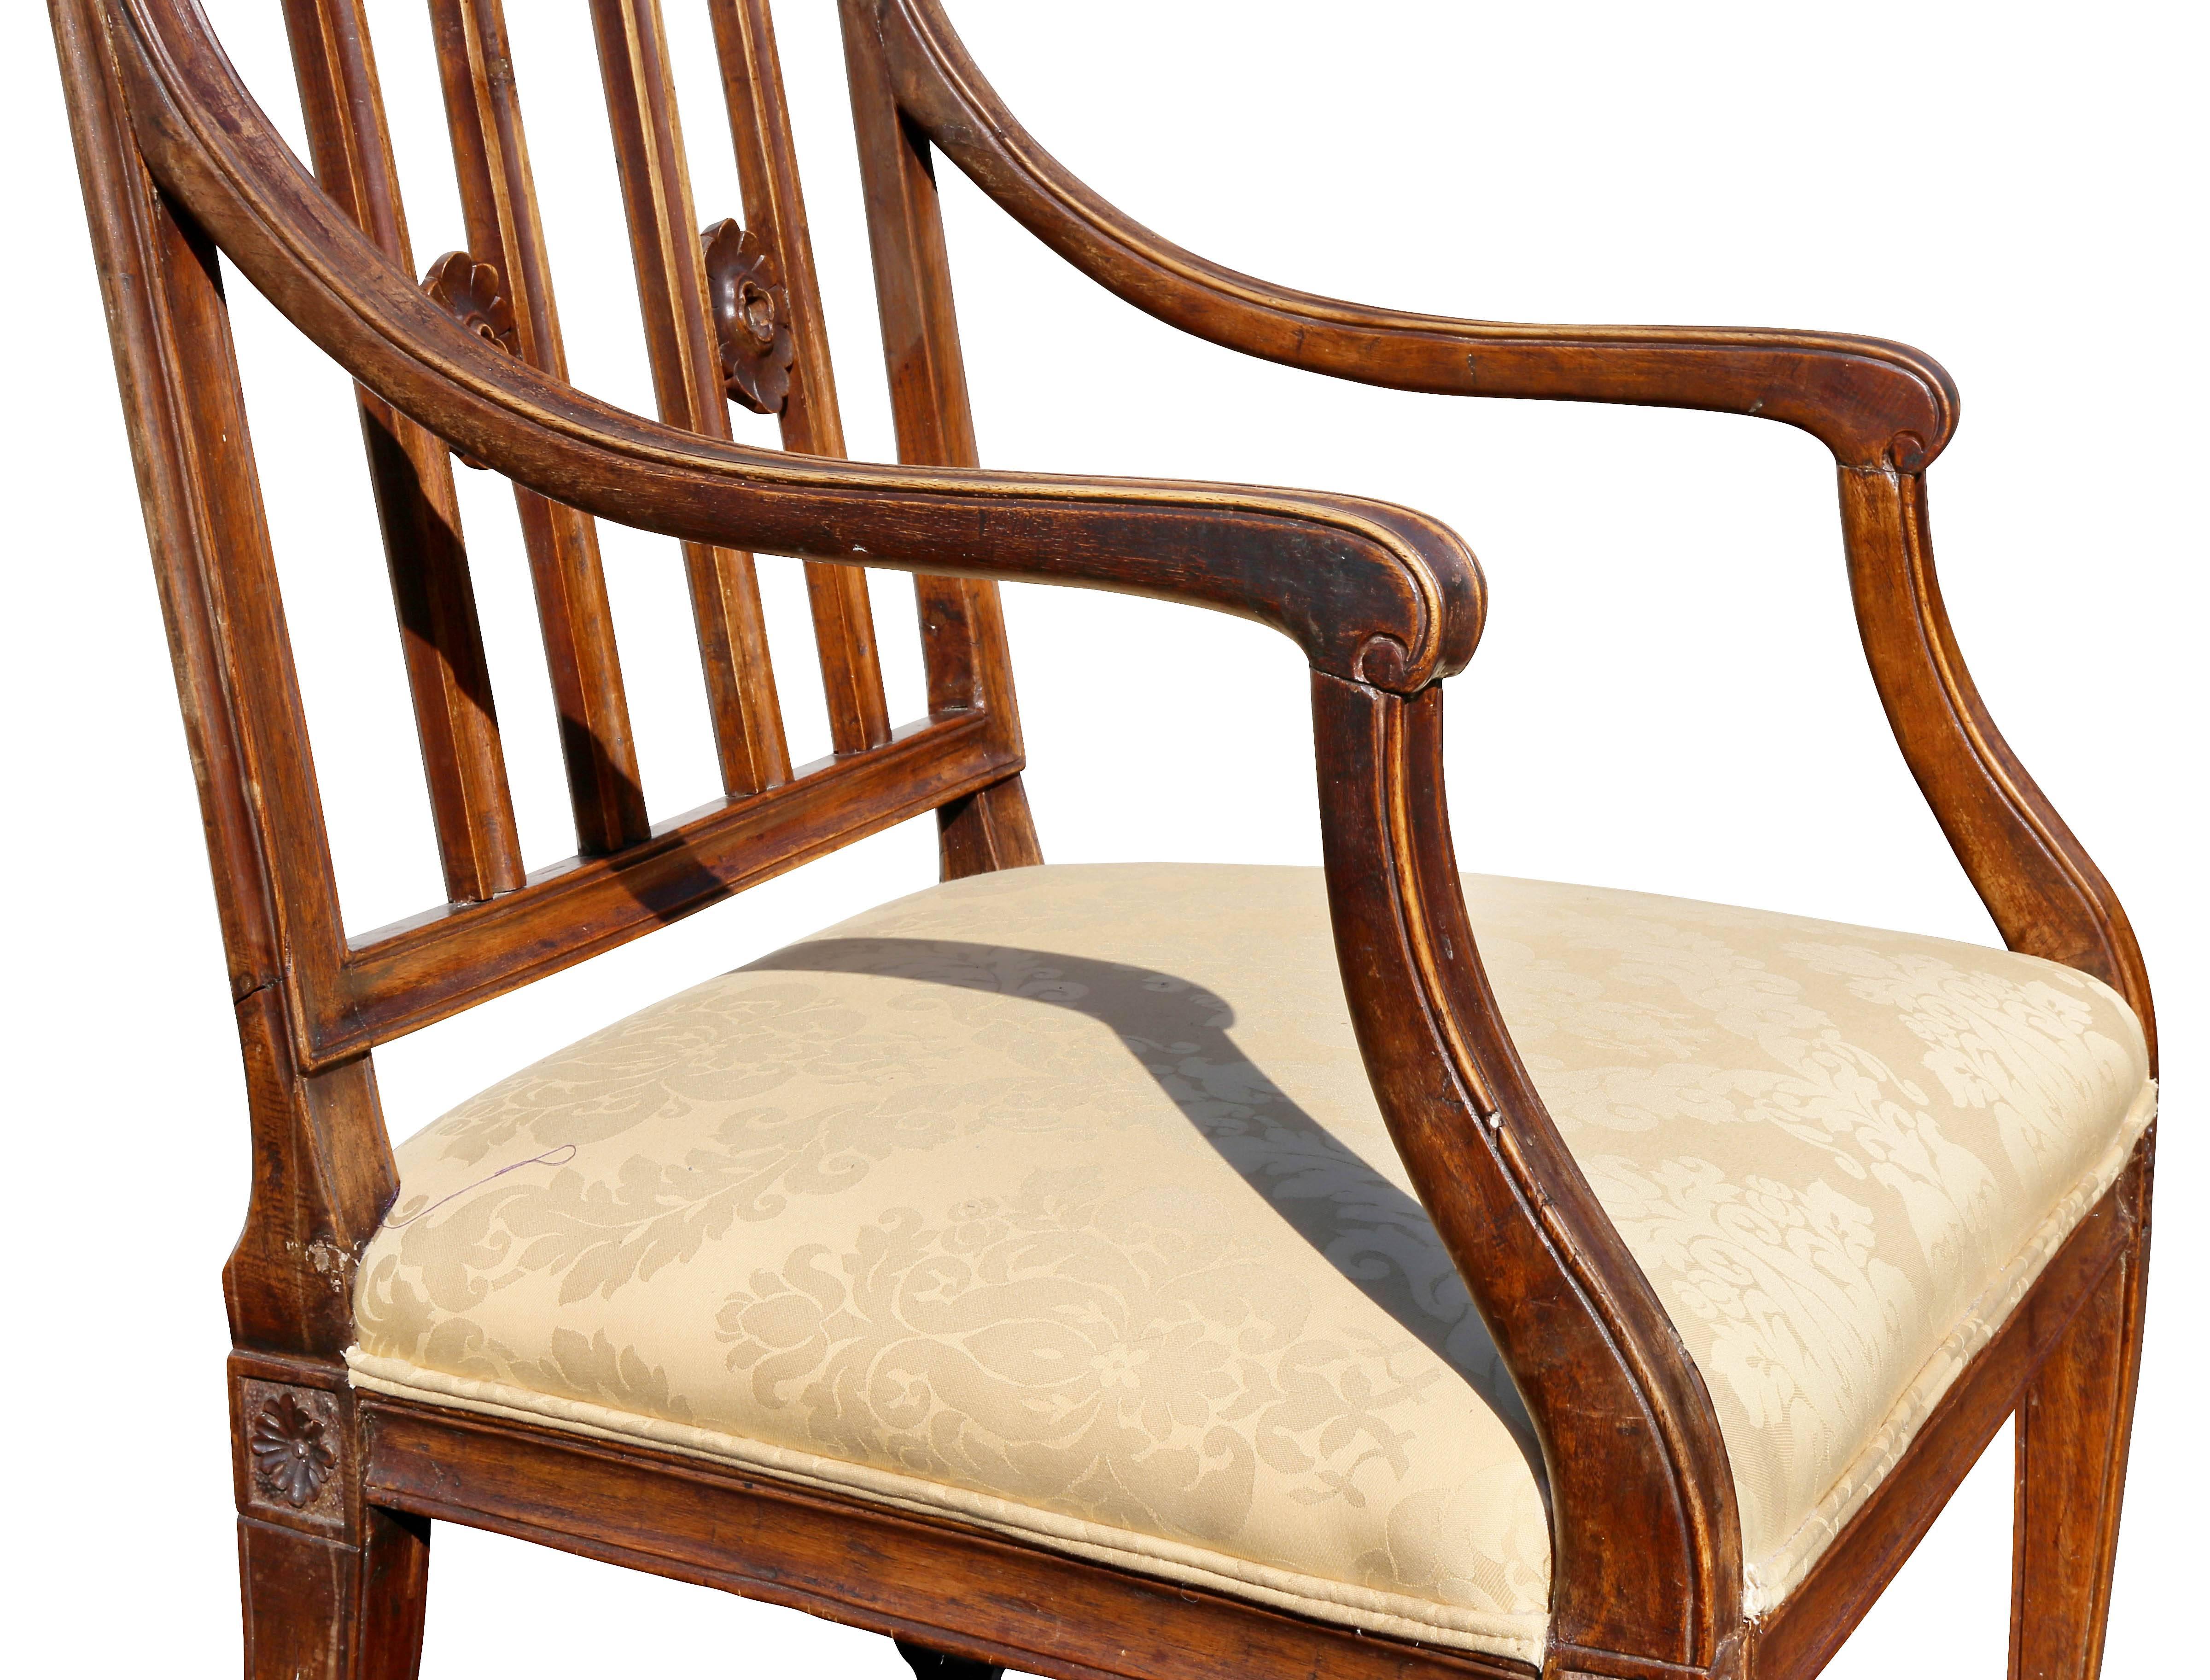 With straight crest rail over two pairs of vertical splats with carved rings over an upholstered seat raised on square tapered legs headed by paterae.